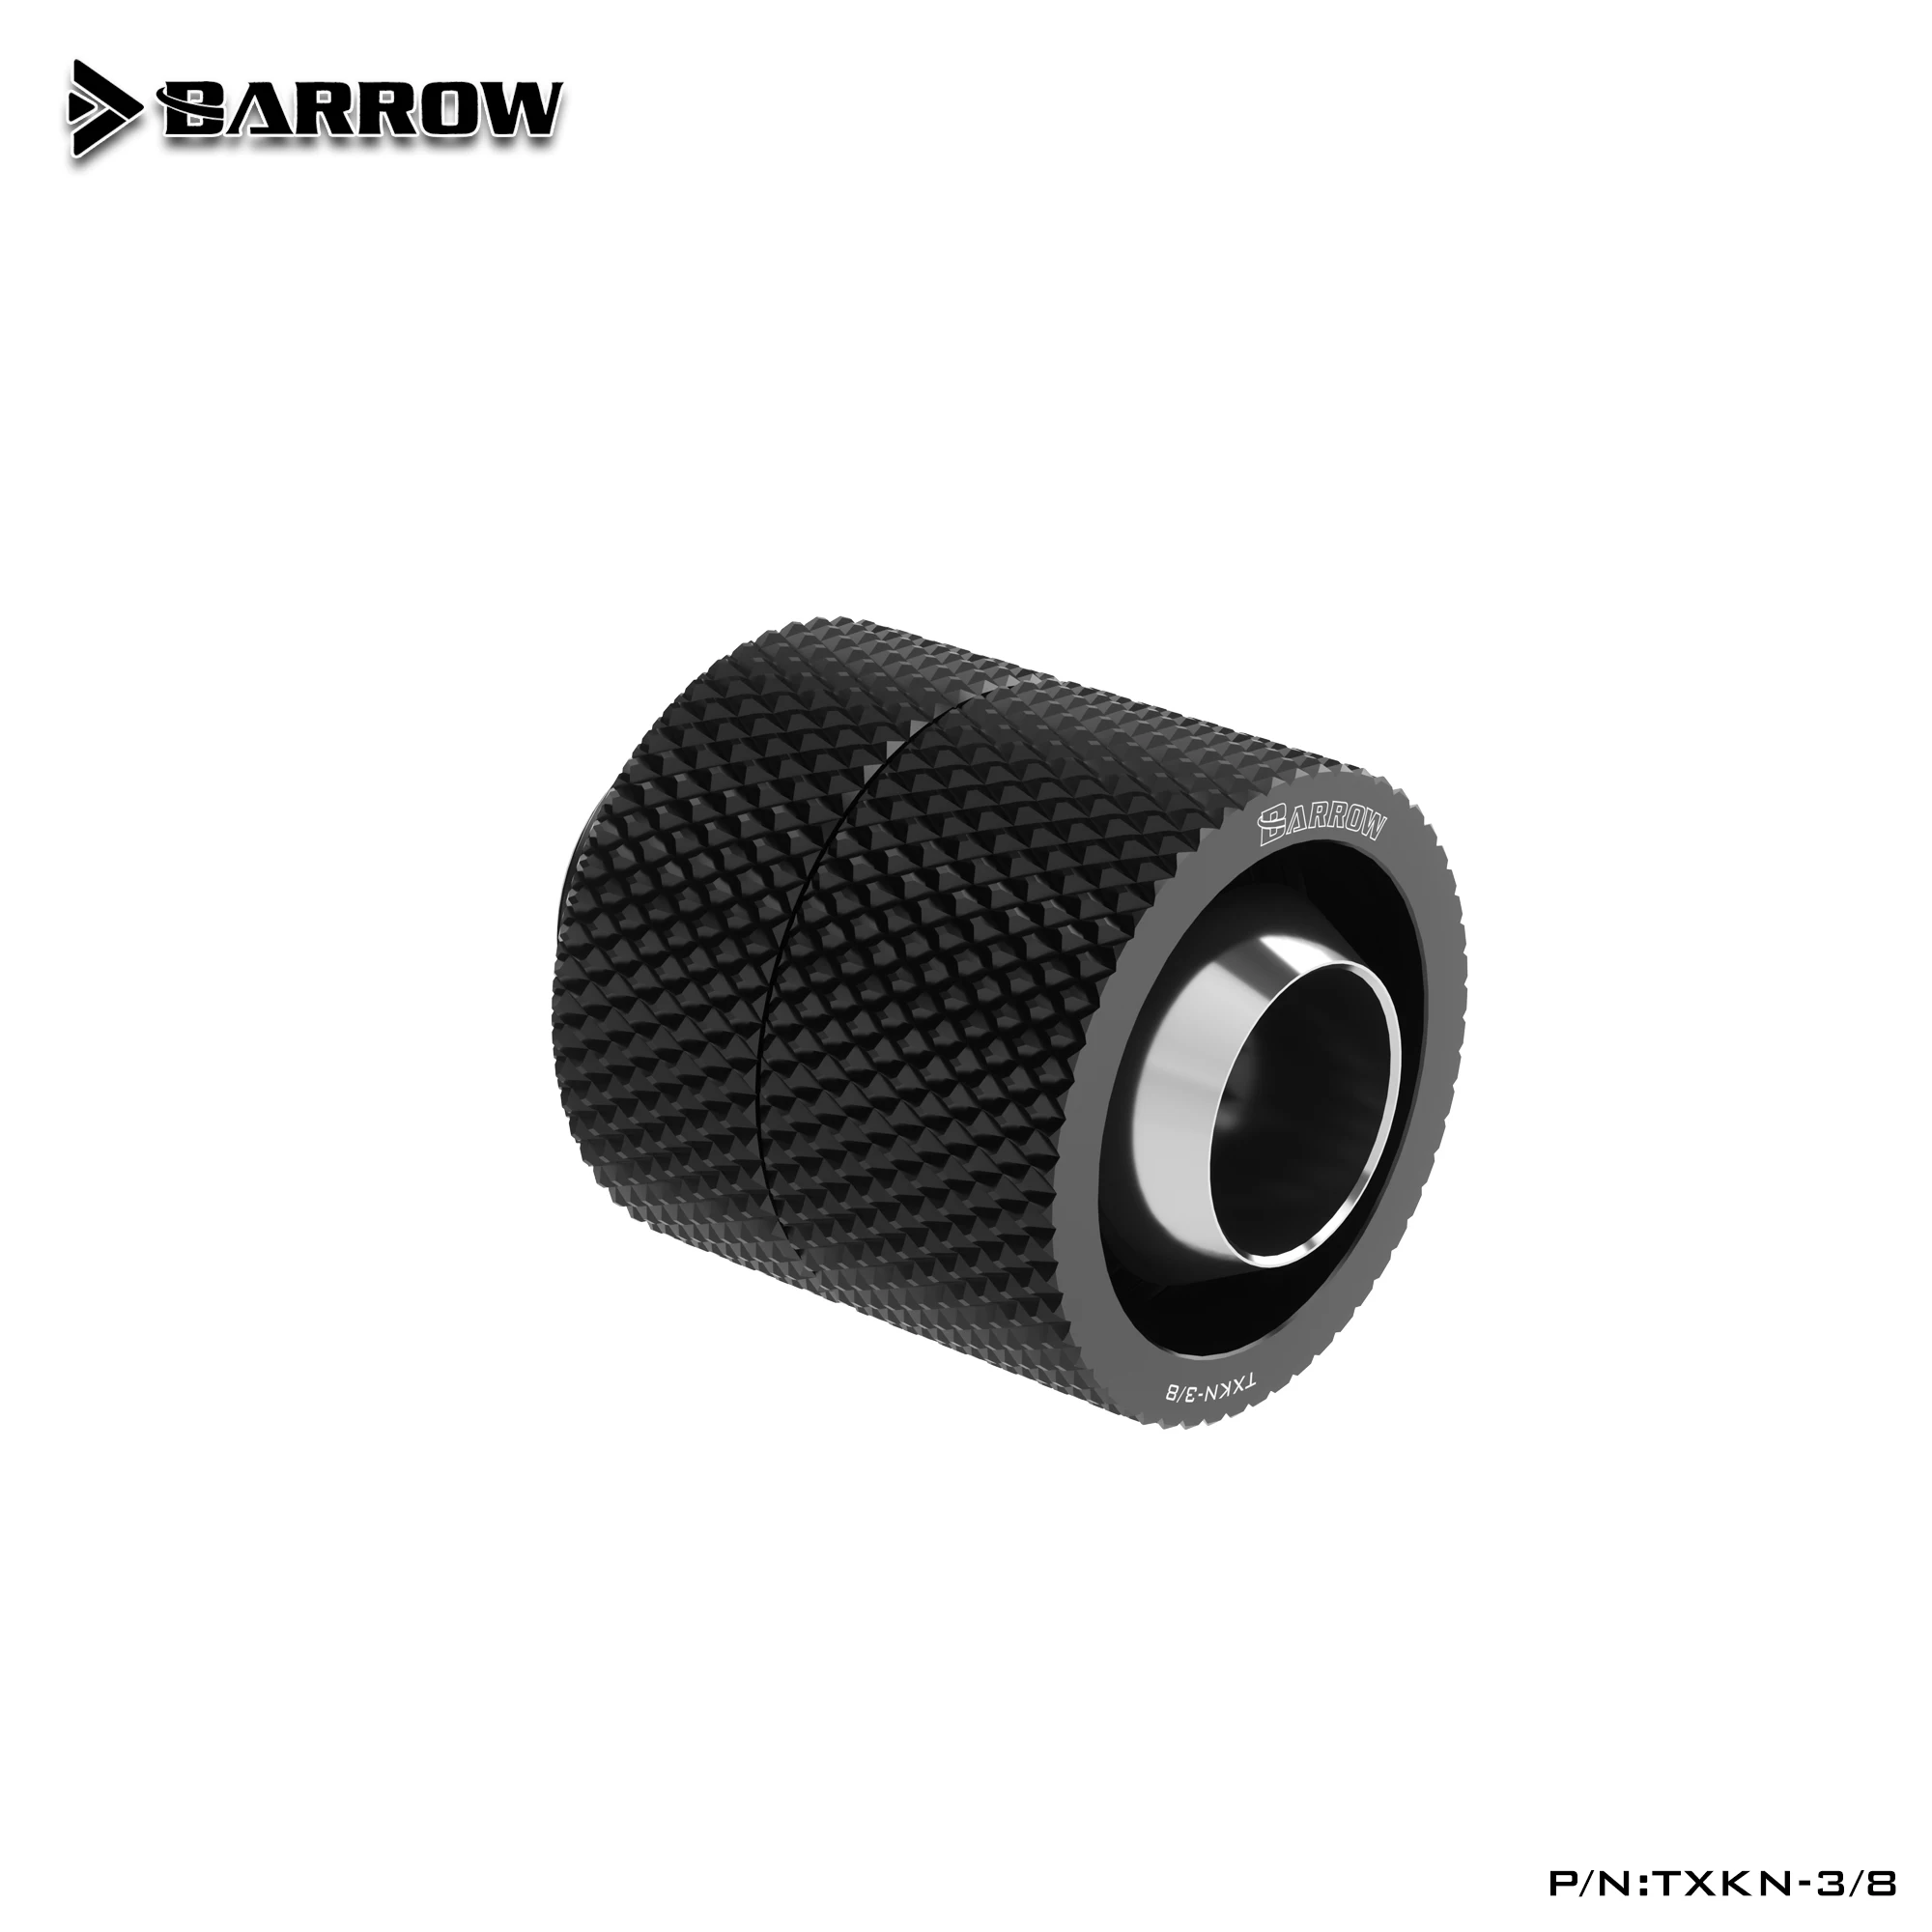 Barrow TXKN-3/8 Hose Fitting 3/8'' ID10mm + OD13mm Hose,3/8ID X 1/2OD Pipe Hand-Tighten Connector 360°Rotation Silver/Black barrow thkn 3 8 v3 3 8 id 5 8 od 10x16mm soft hose fittings g1 4 fittings for soft pipes